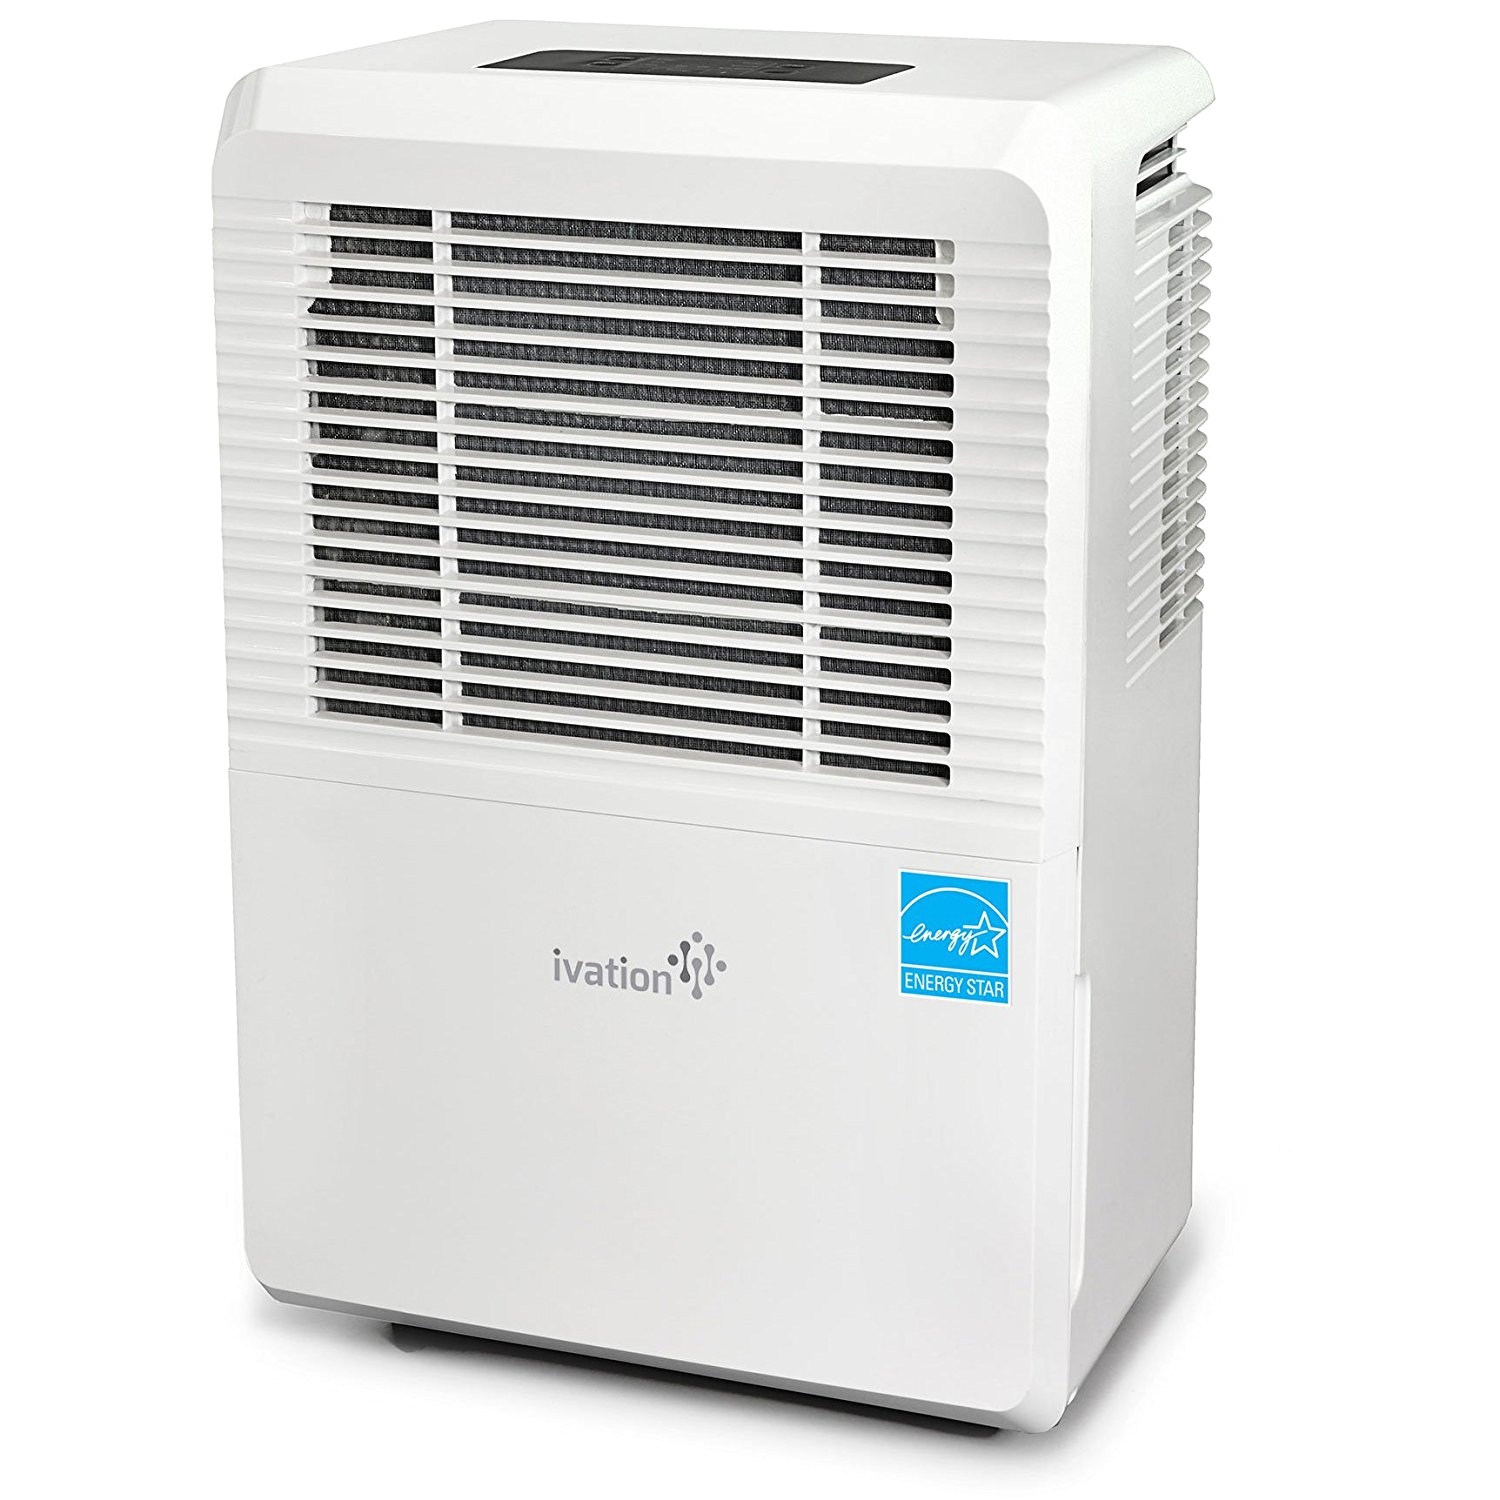 amazon com ivation 70 pint energy star dehumidifier large capacity for spaces up to 4 500 sq ft includes programmable humidistat hose connector